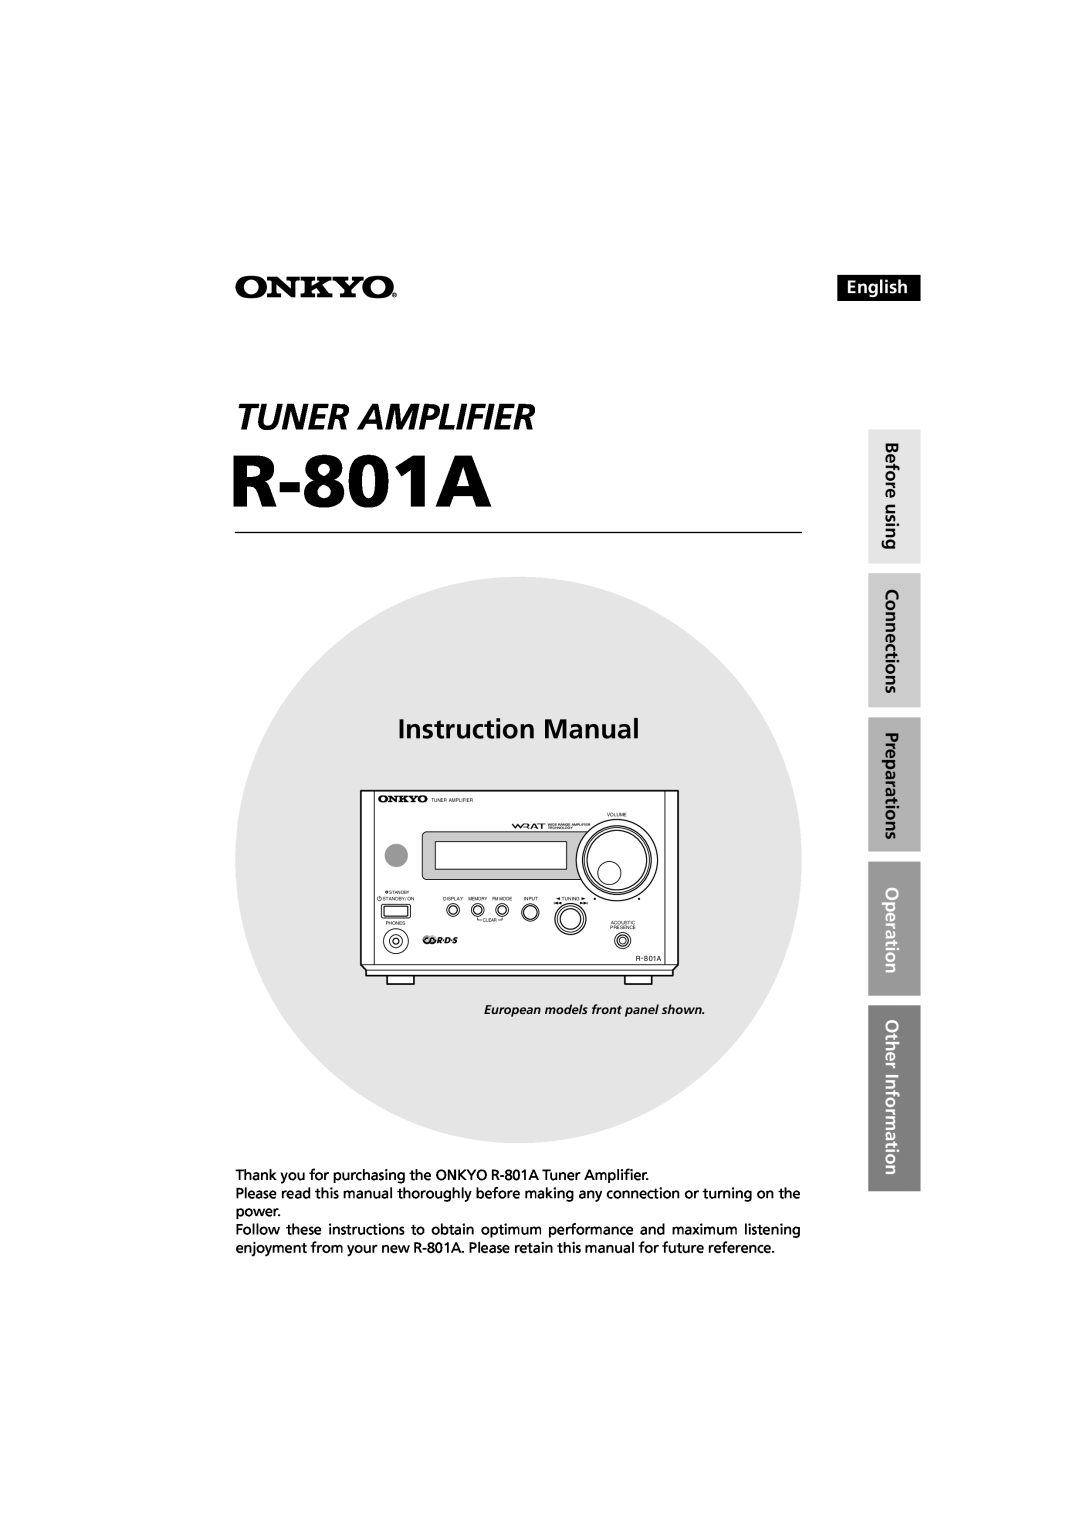 Onkyo R-801A instruction manual Tuner Amplifier, English 